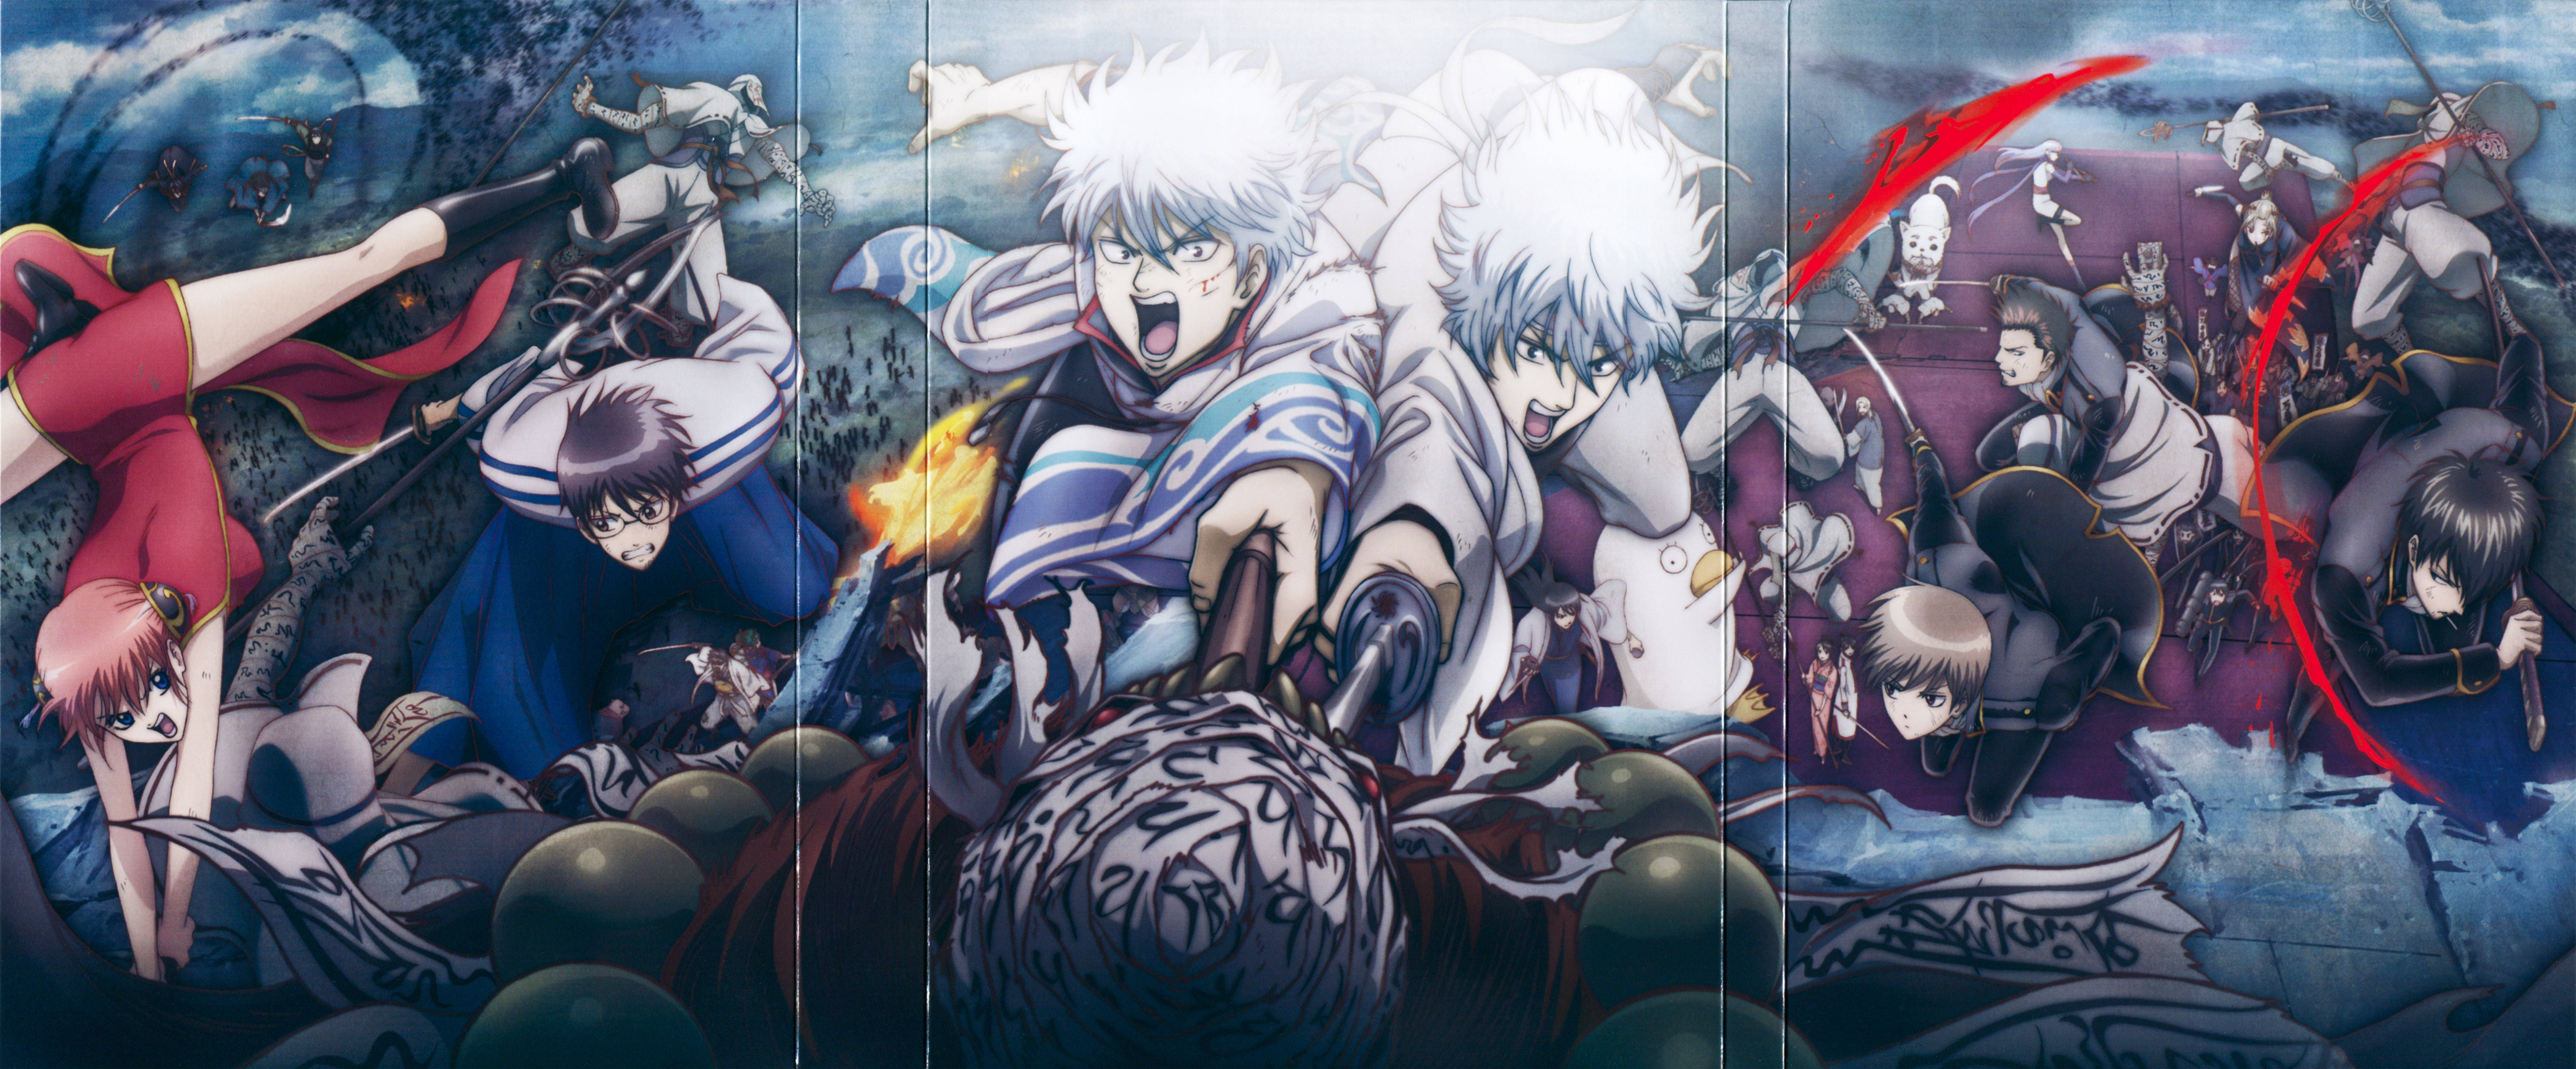 Gintama Characters Reaching A Ball Background